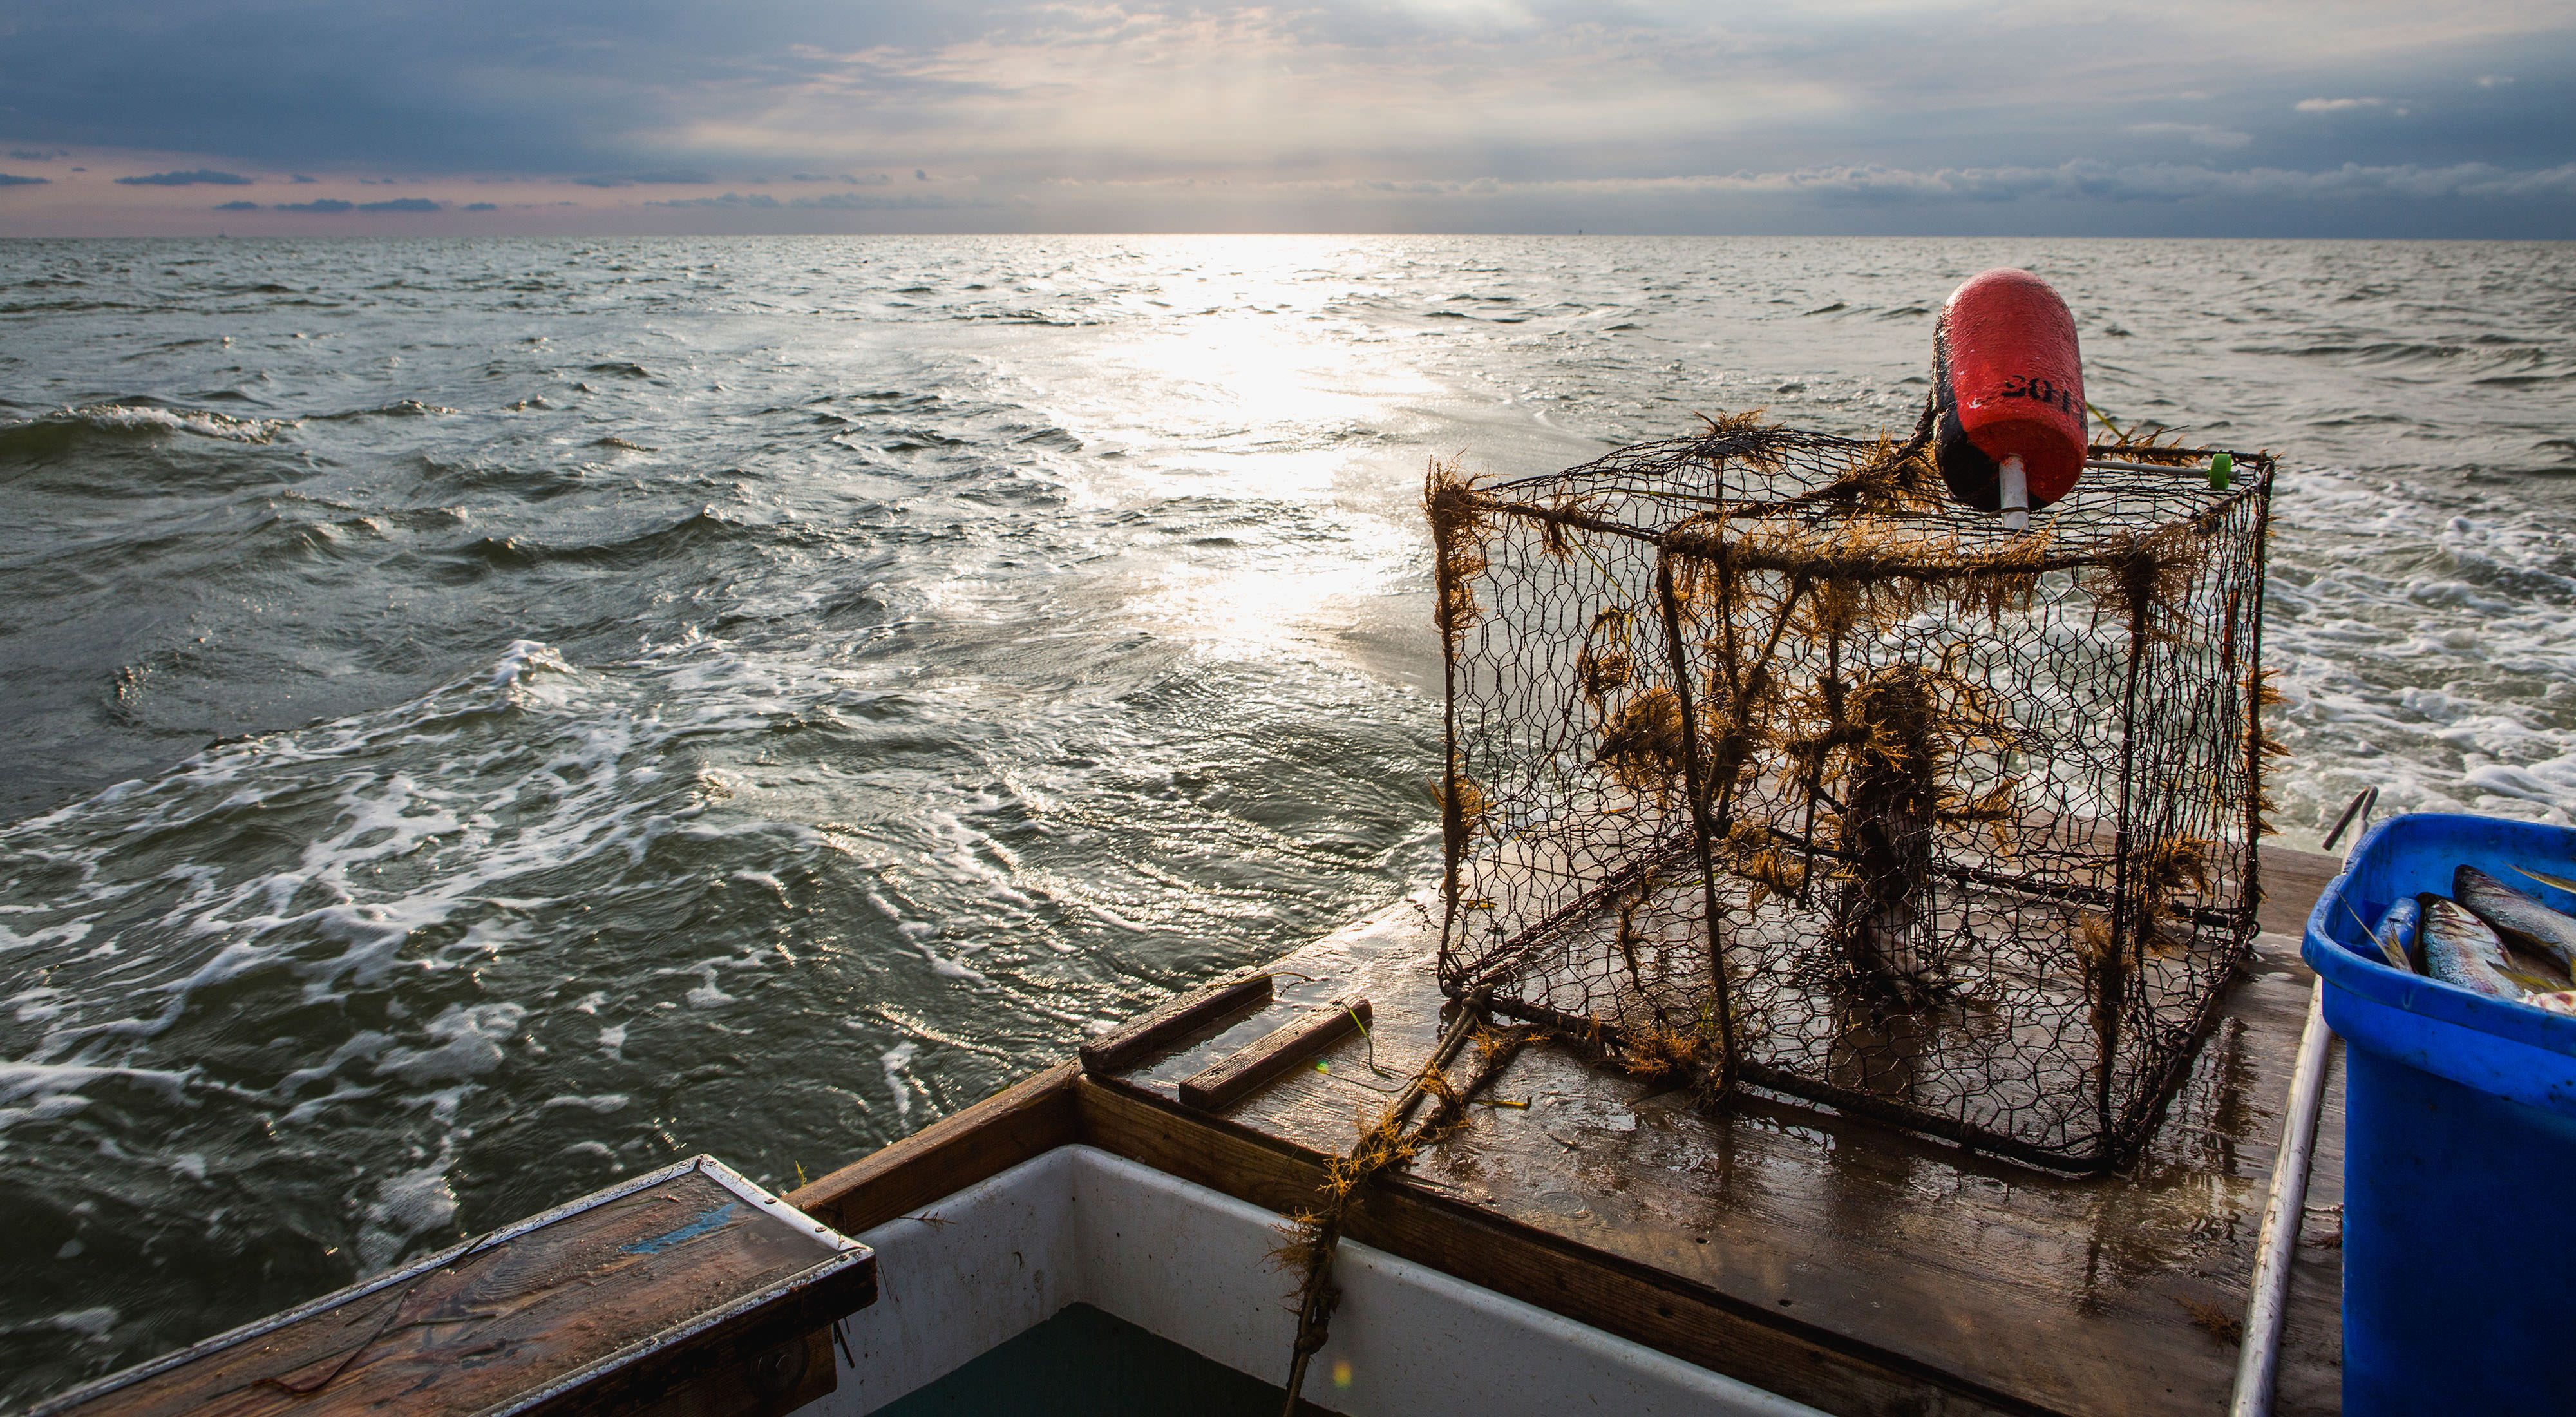 View from the end of a boat looking into the Chesapeake Bay. A small red buoy sits on top of a seaweed covered crab trap. A blue bin containing silver fish sits next to it.